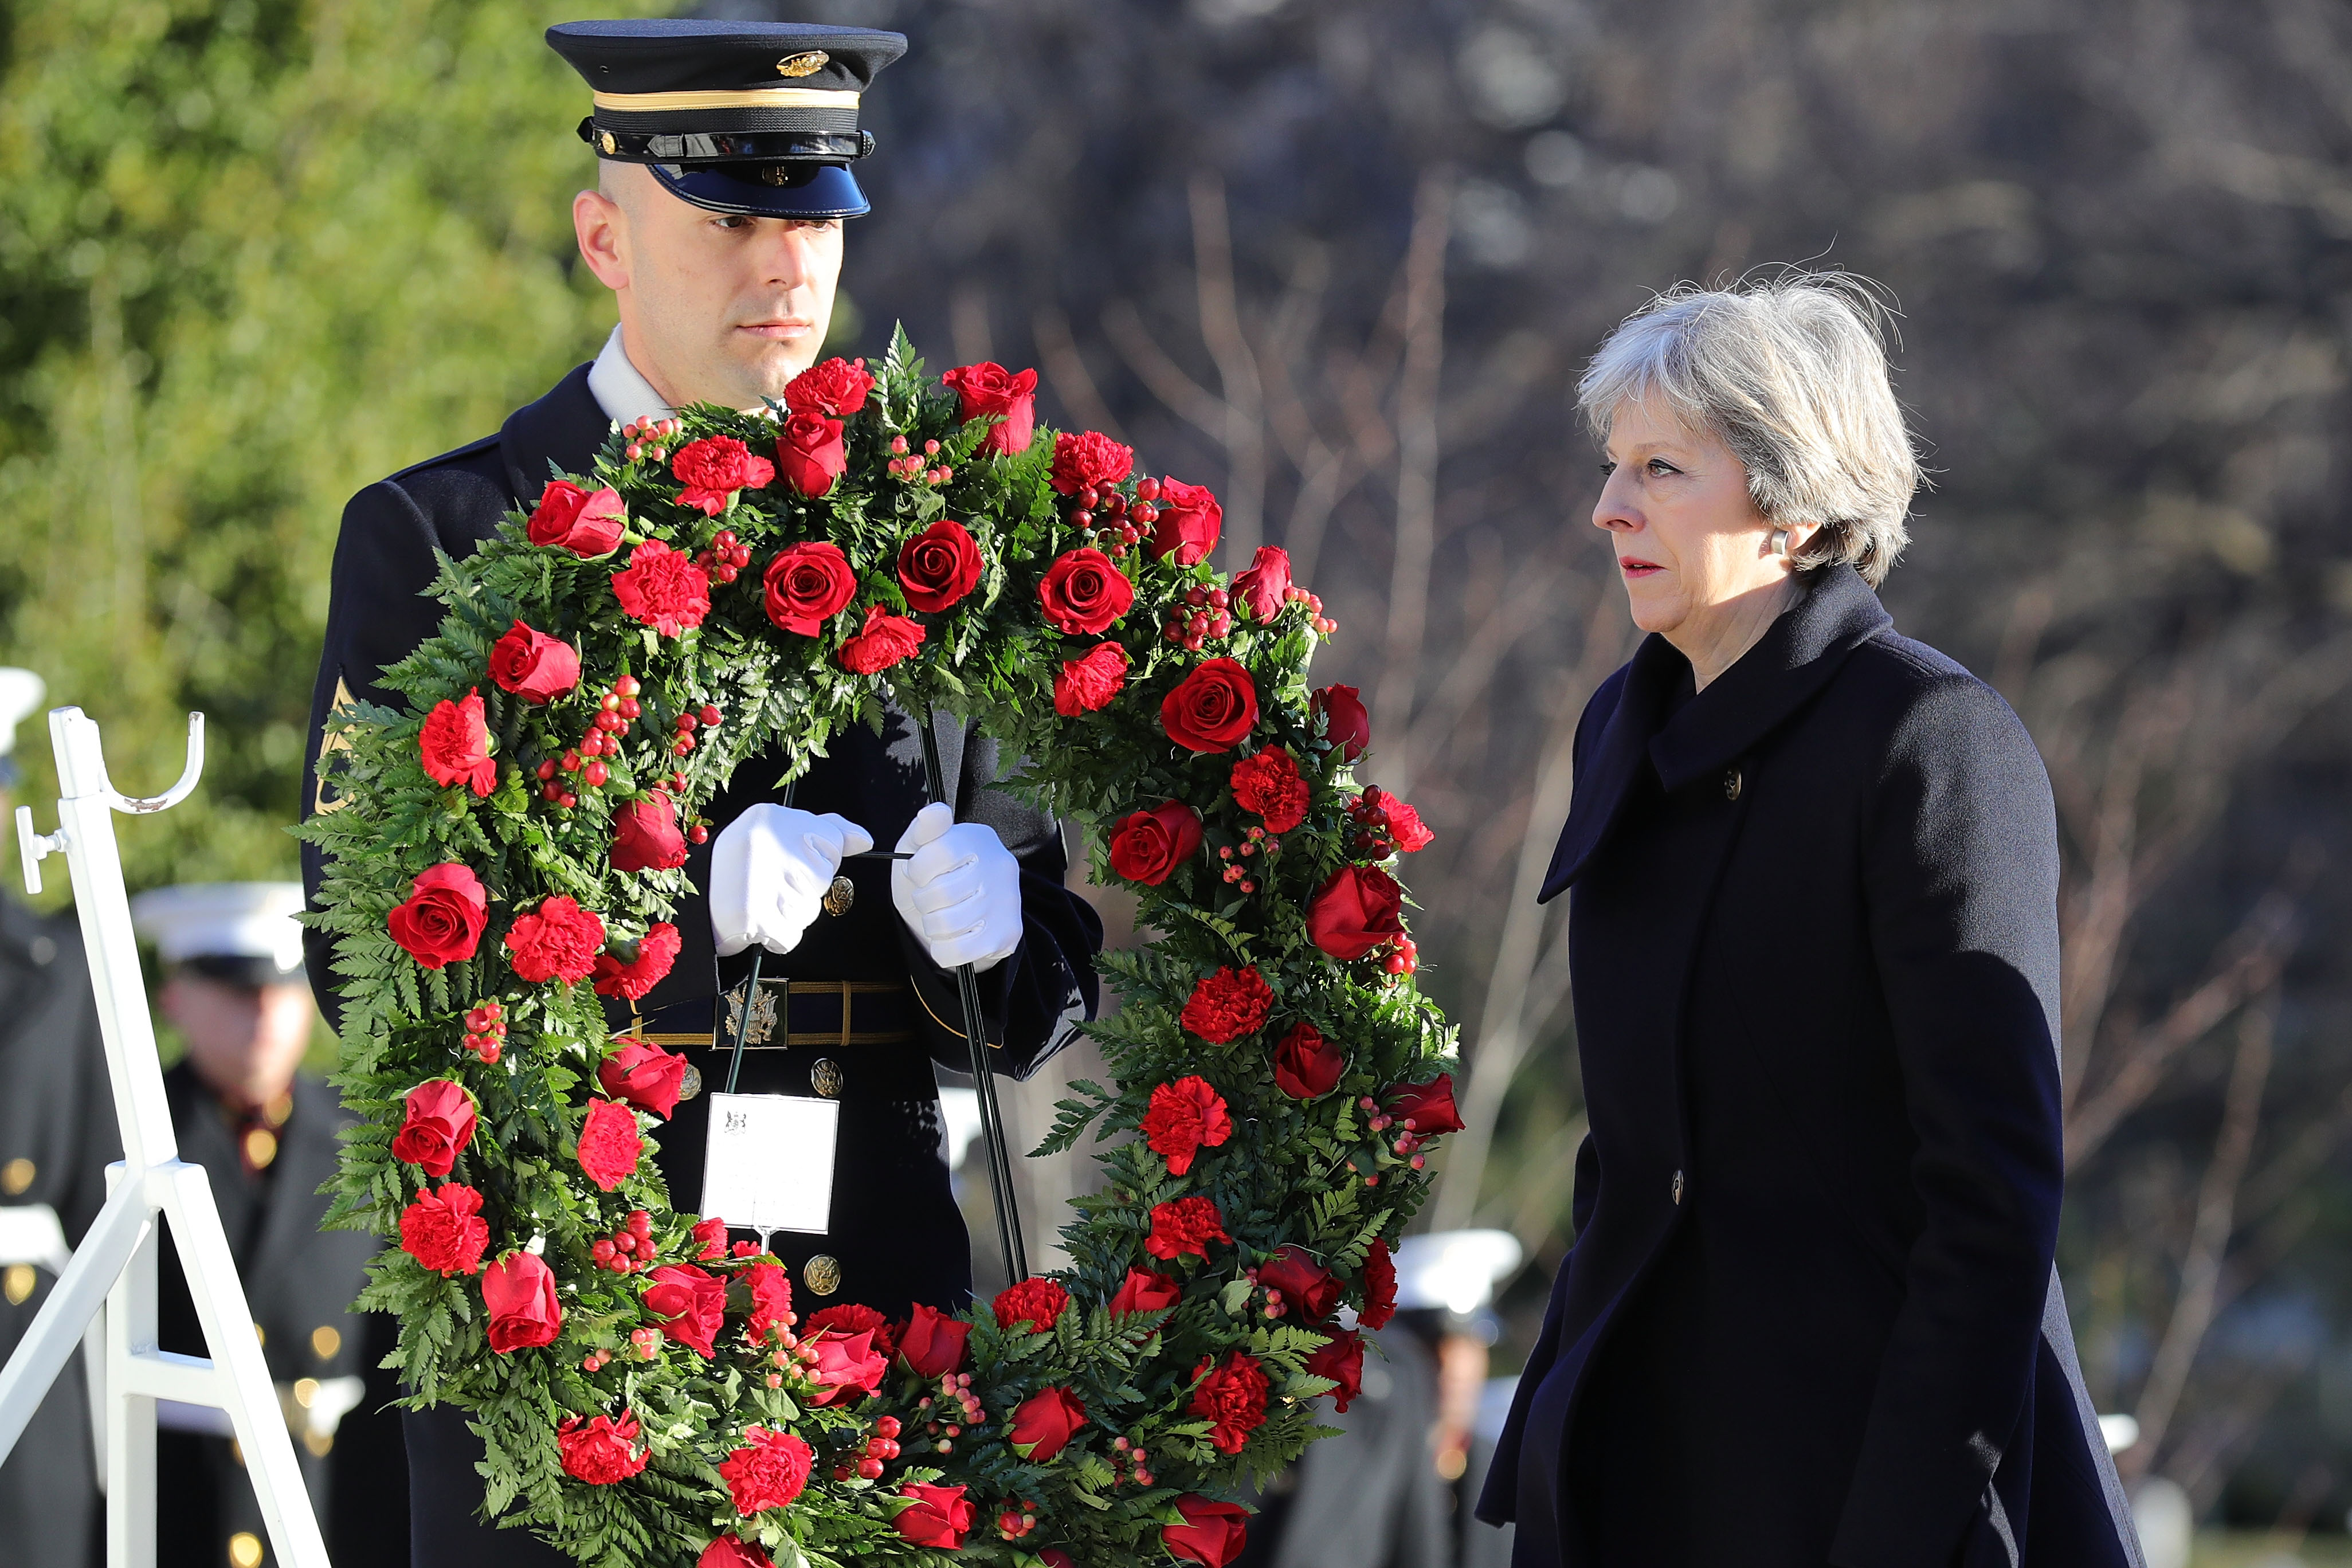 British Prime Minister Theresa May lays a wreath at the Tomb of the Unknown Solider in Arlington National Cemetery on January 27, 2017 in Arlington, Virginia. (Christopher Furlong—Getty Images)